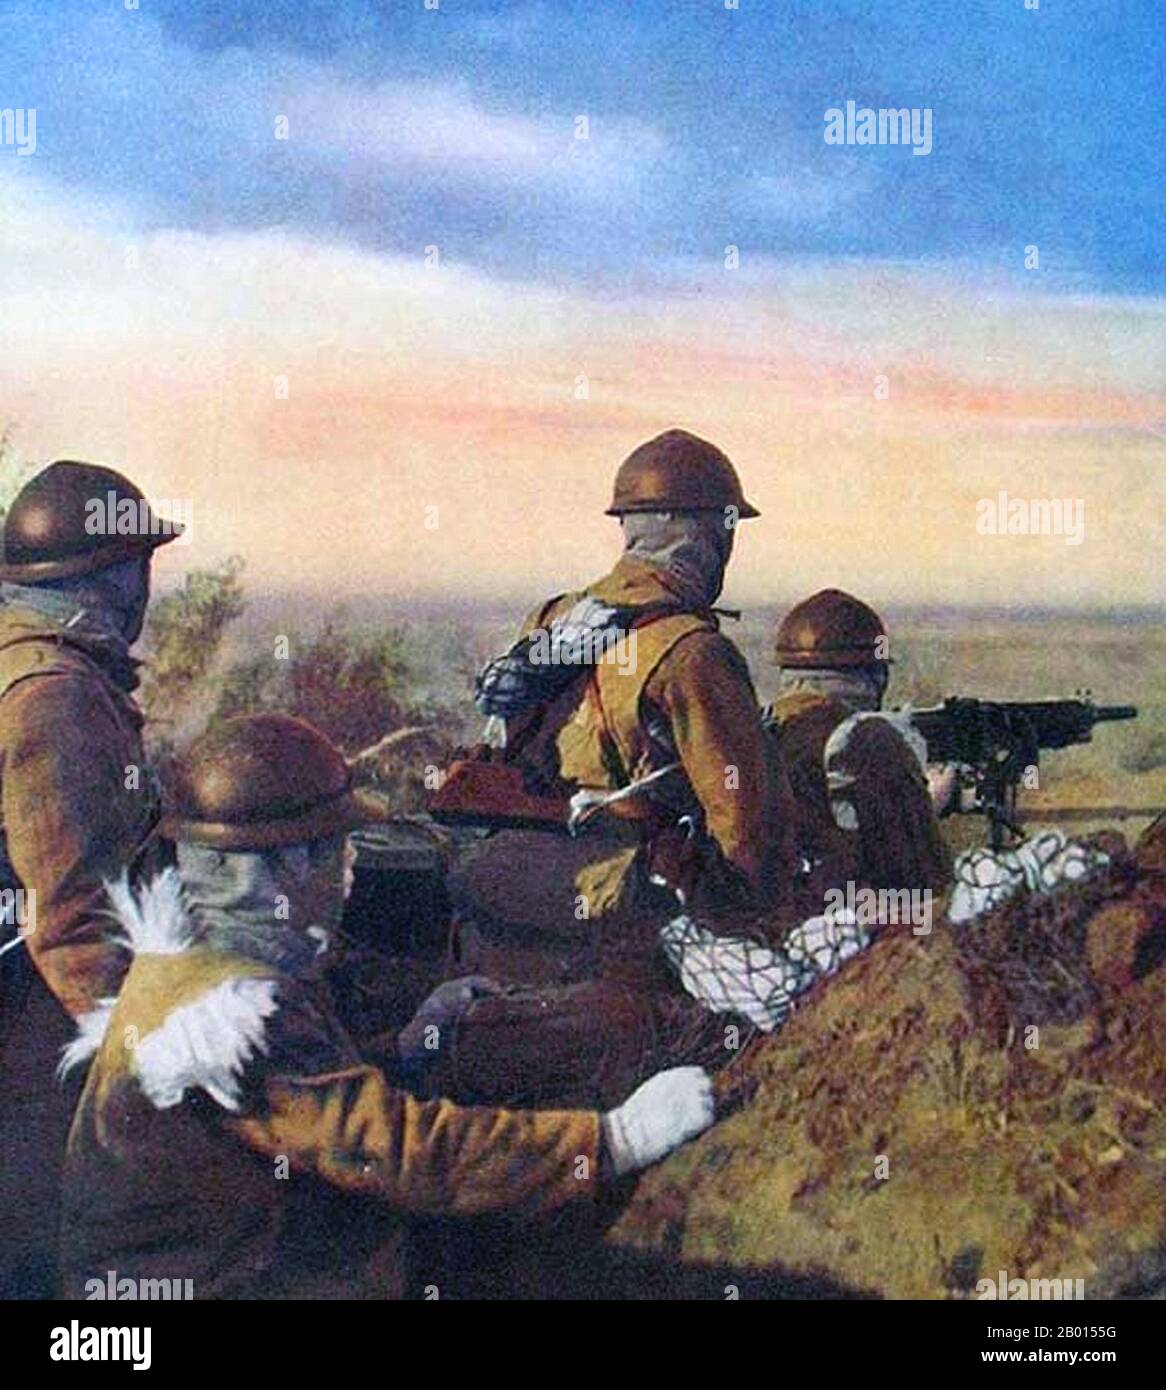 China: Japanese troops using a heavy machine gun during the invasion of Manchuria in 1931.  The Second Sino-Japanese War was a military conflict fought primarily between the Republic of China and the Empire of Japan. After the Japanese attack on Pearl Harbor, the war merged into the greater conflict of World War II as a major front of what is broadly known as the Pacific War. Although the two countries had fought intermittently since 1931, total war started in earnest in 1937 and ended only with the surrender of Japan in 1945. Stock Photo